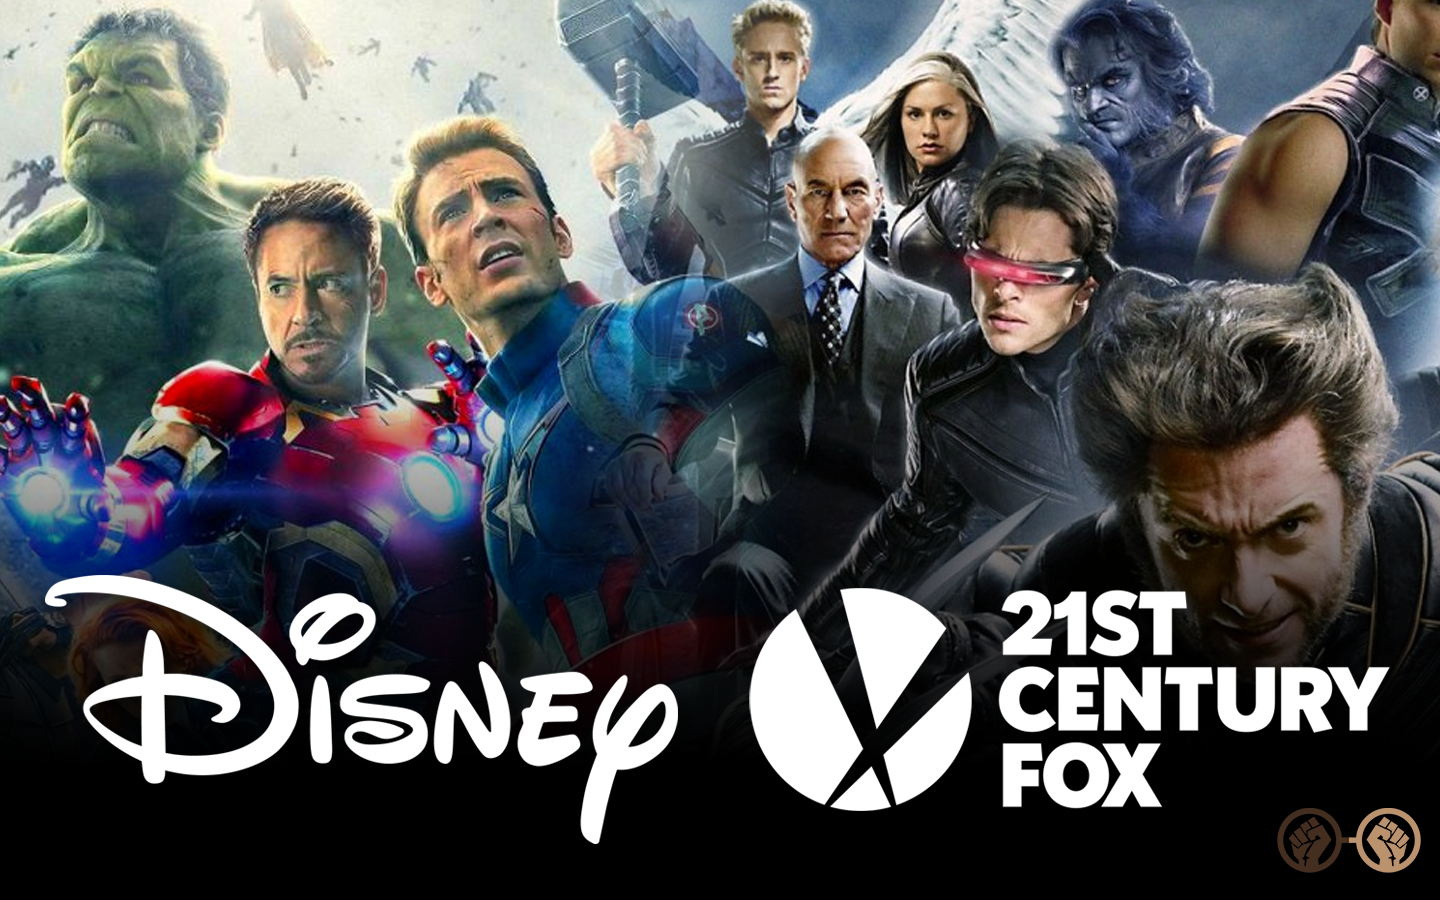 Disney Completes Deal to Buy Fox TV, Movie Assets for $52.4 Billion